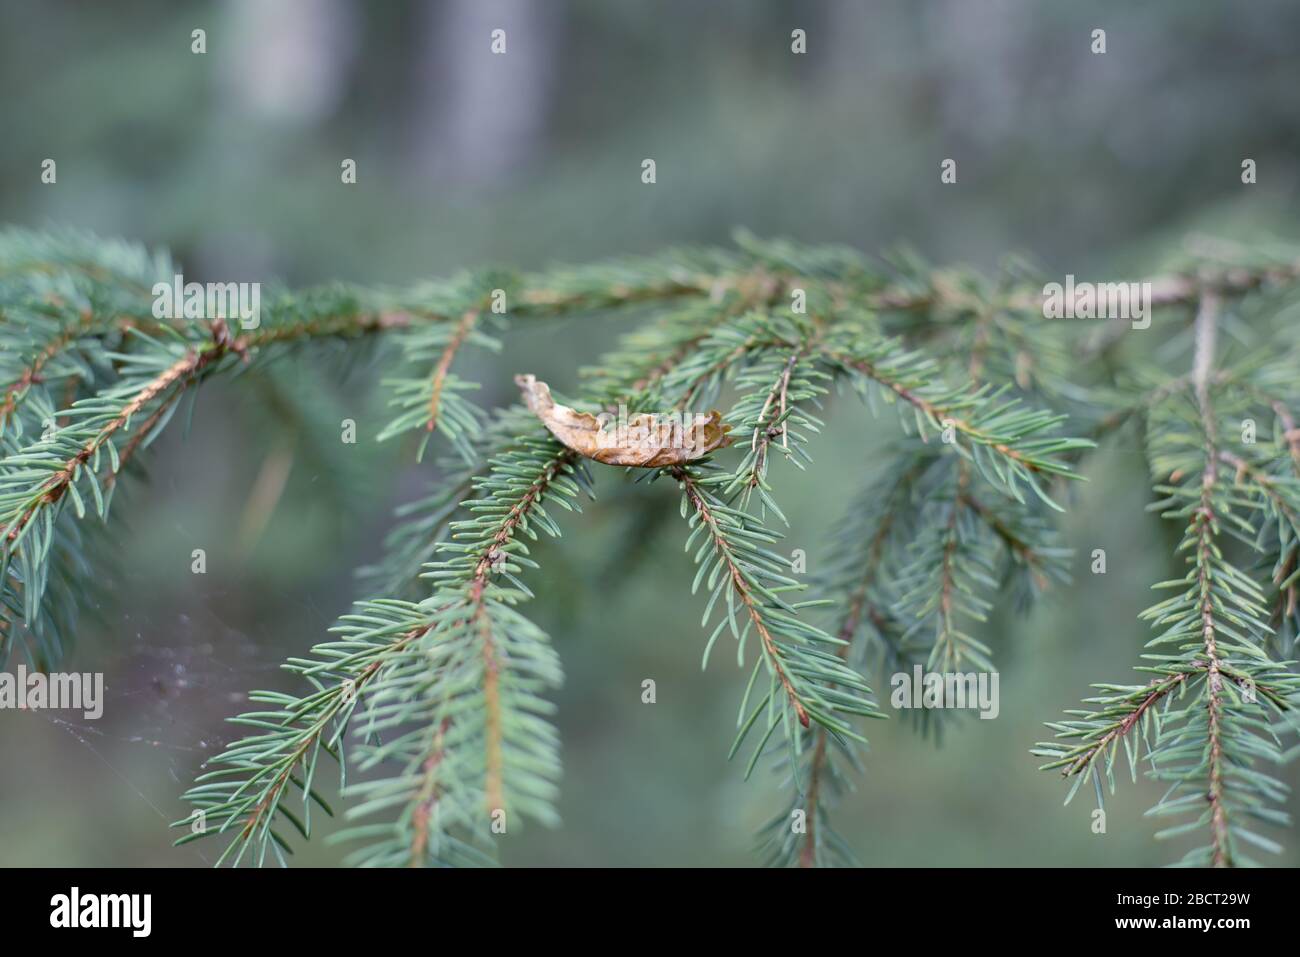 Closeup of branch with short pine needles and leaf on them Stock Photo